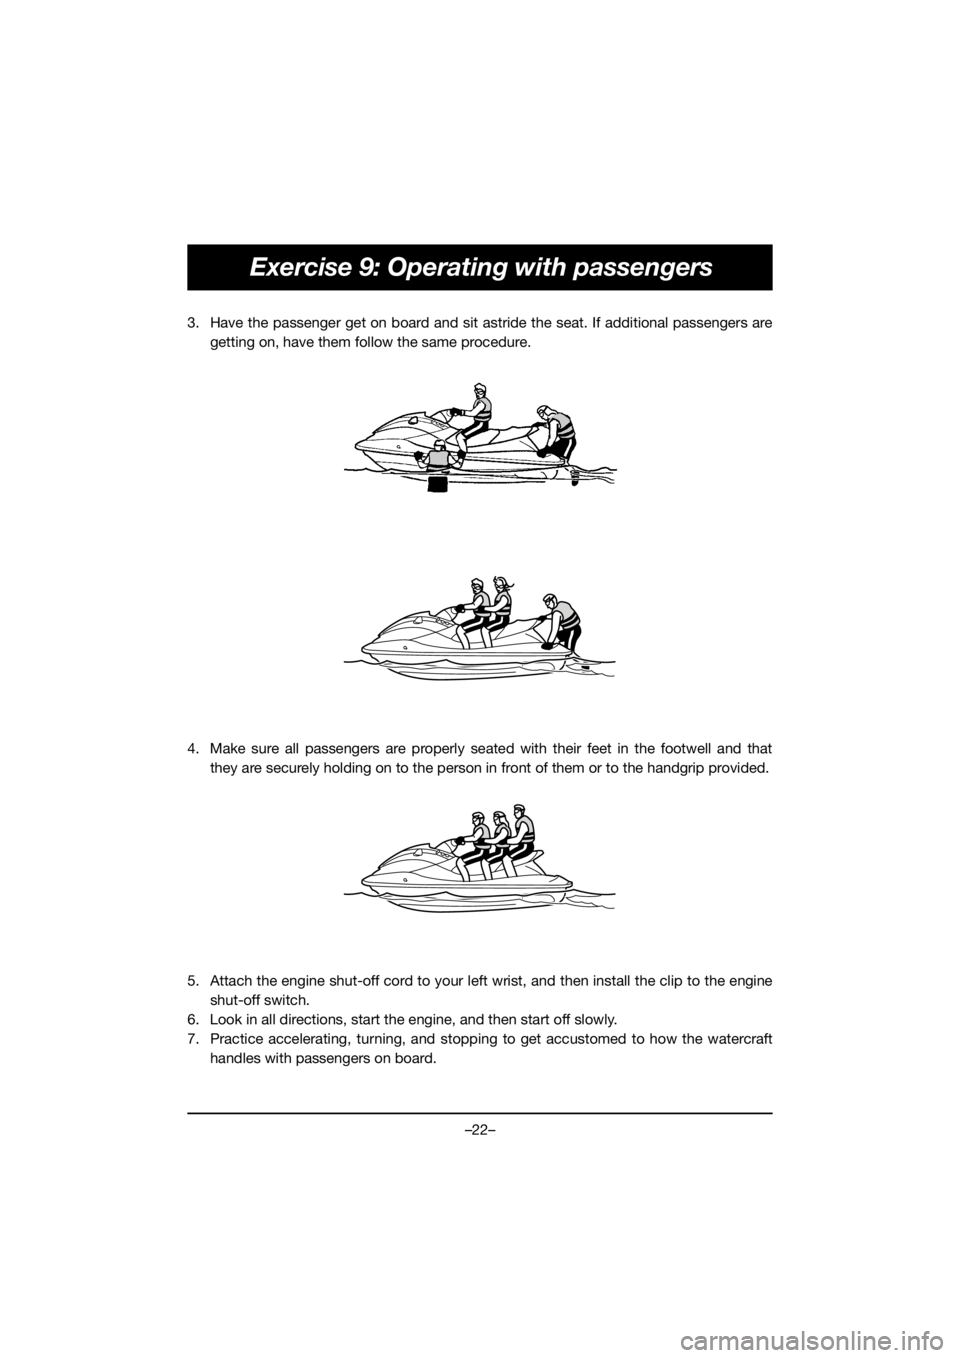 YAMAHA EX 2021  Owners Manual –22–
Exercise 9: Operating with passengers
3. Have the passenger get on board and sit astride the seat. If additional passengers aregetting on, have them follow the same procedure. 
4. Make sure a